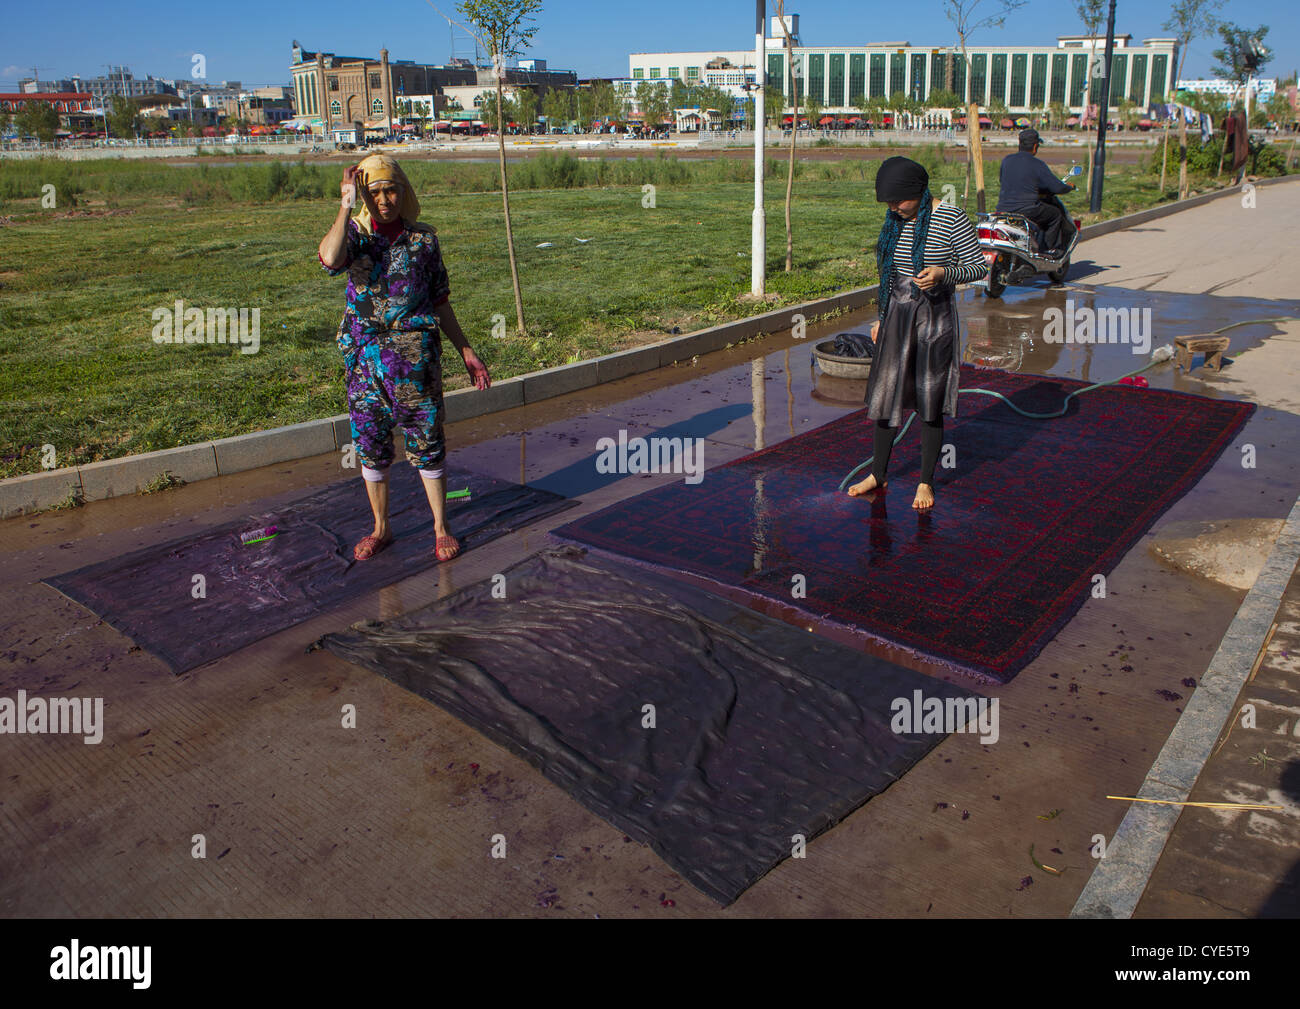 Uyghur Women Cleaning Carpets In Old Town Of Kashgar, Xinjiang Uyghur Autonomous Region, China Stock Photo